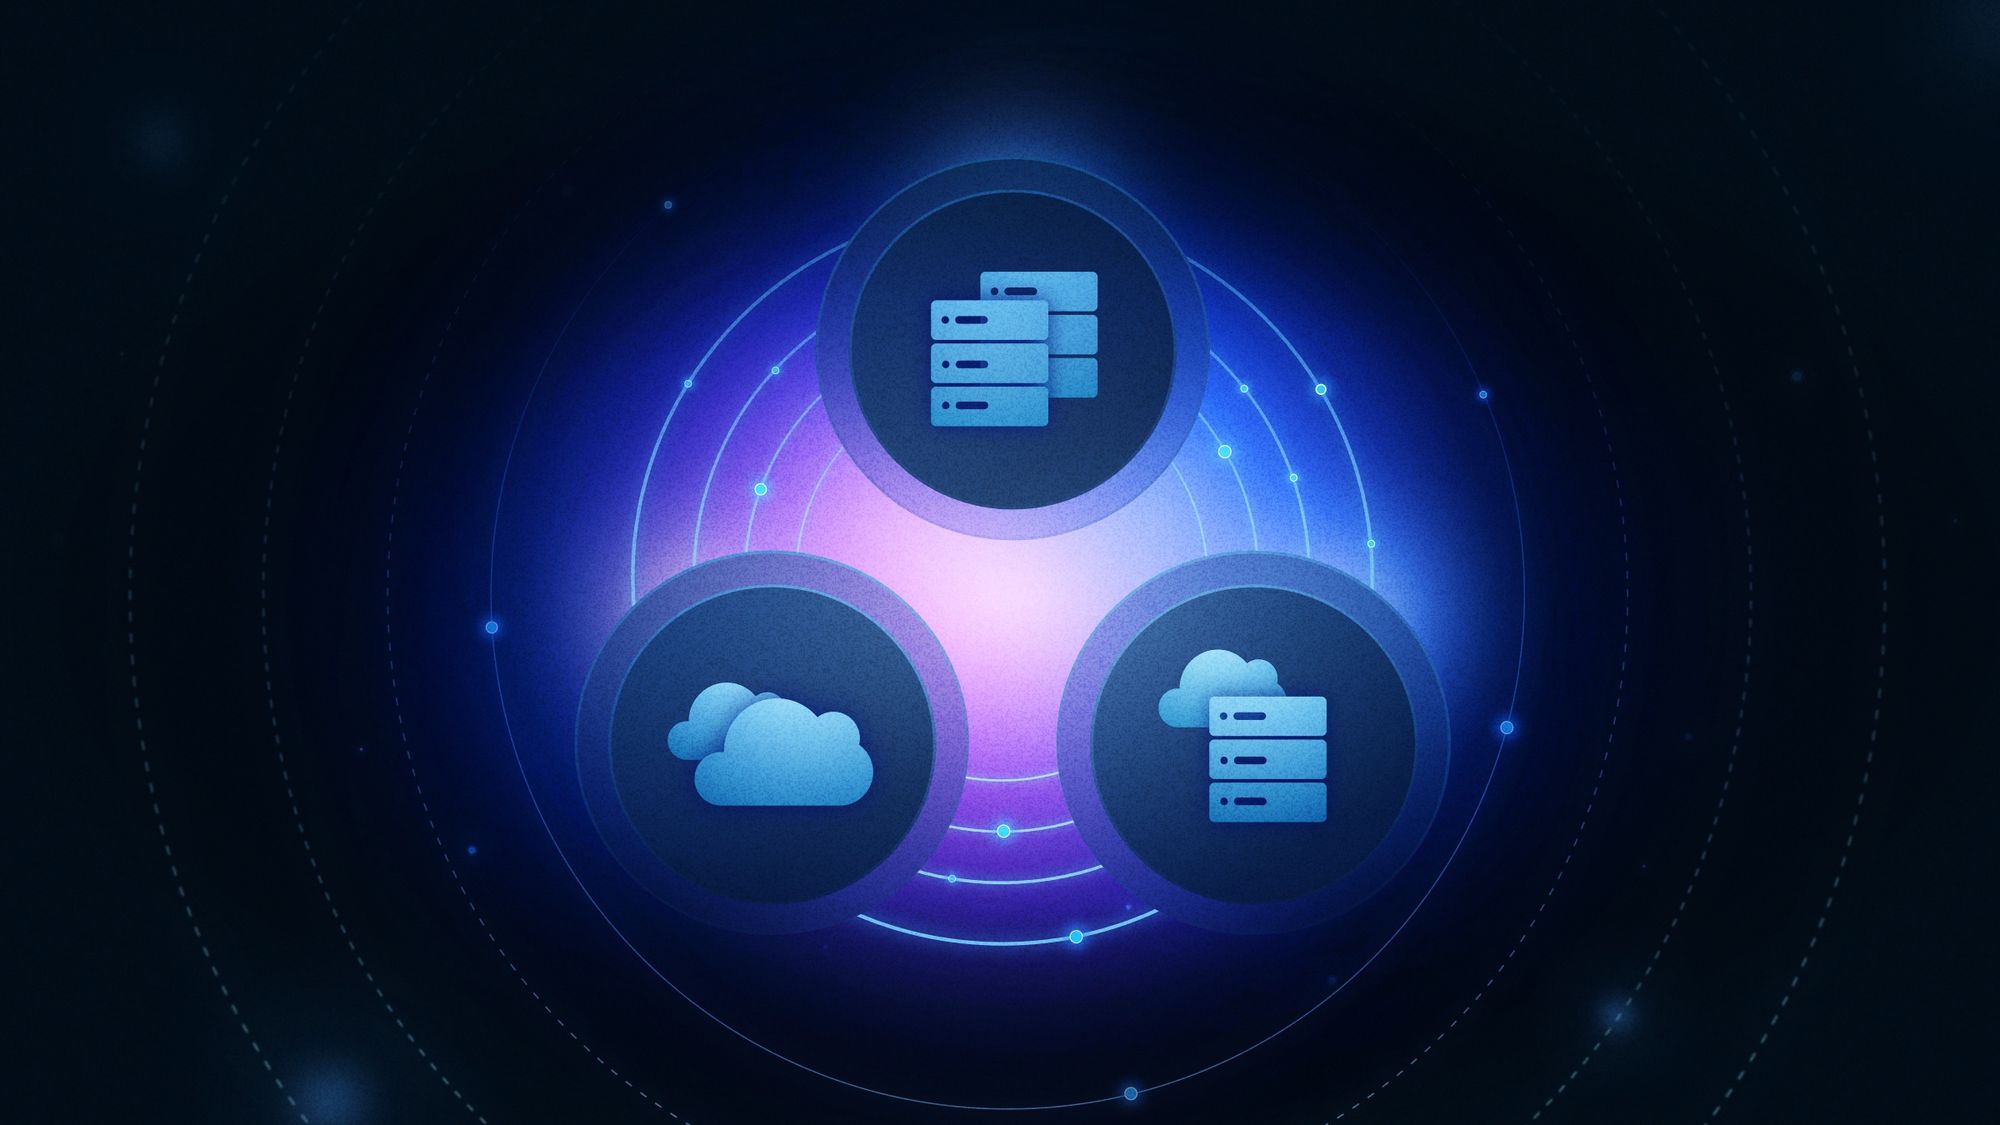 networking strategies with hybrid-cloud vs multi-cloud vs multi-orchestrator architectures